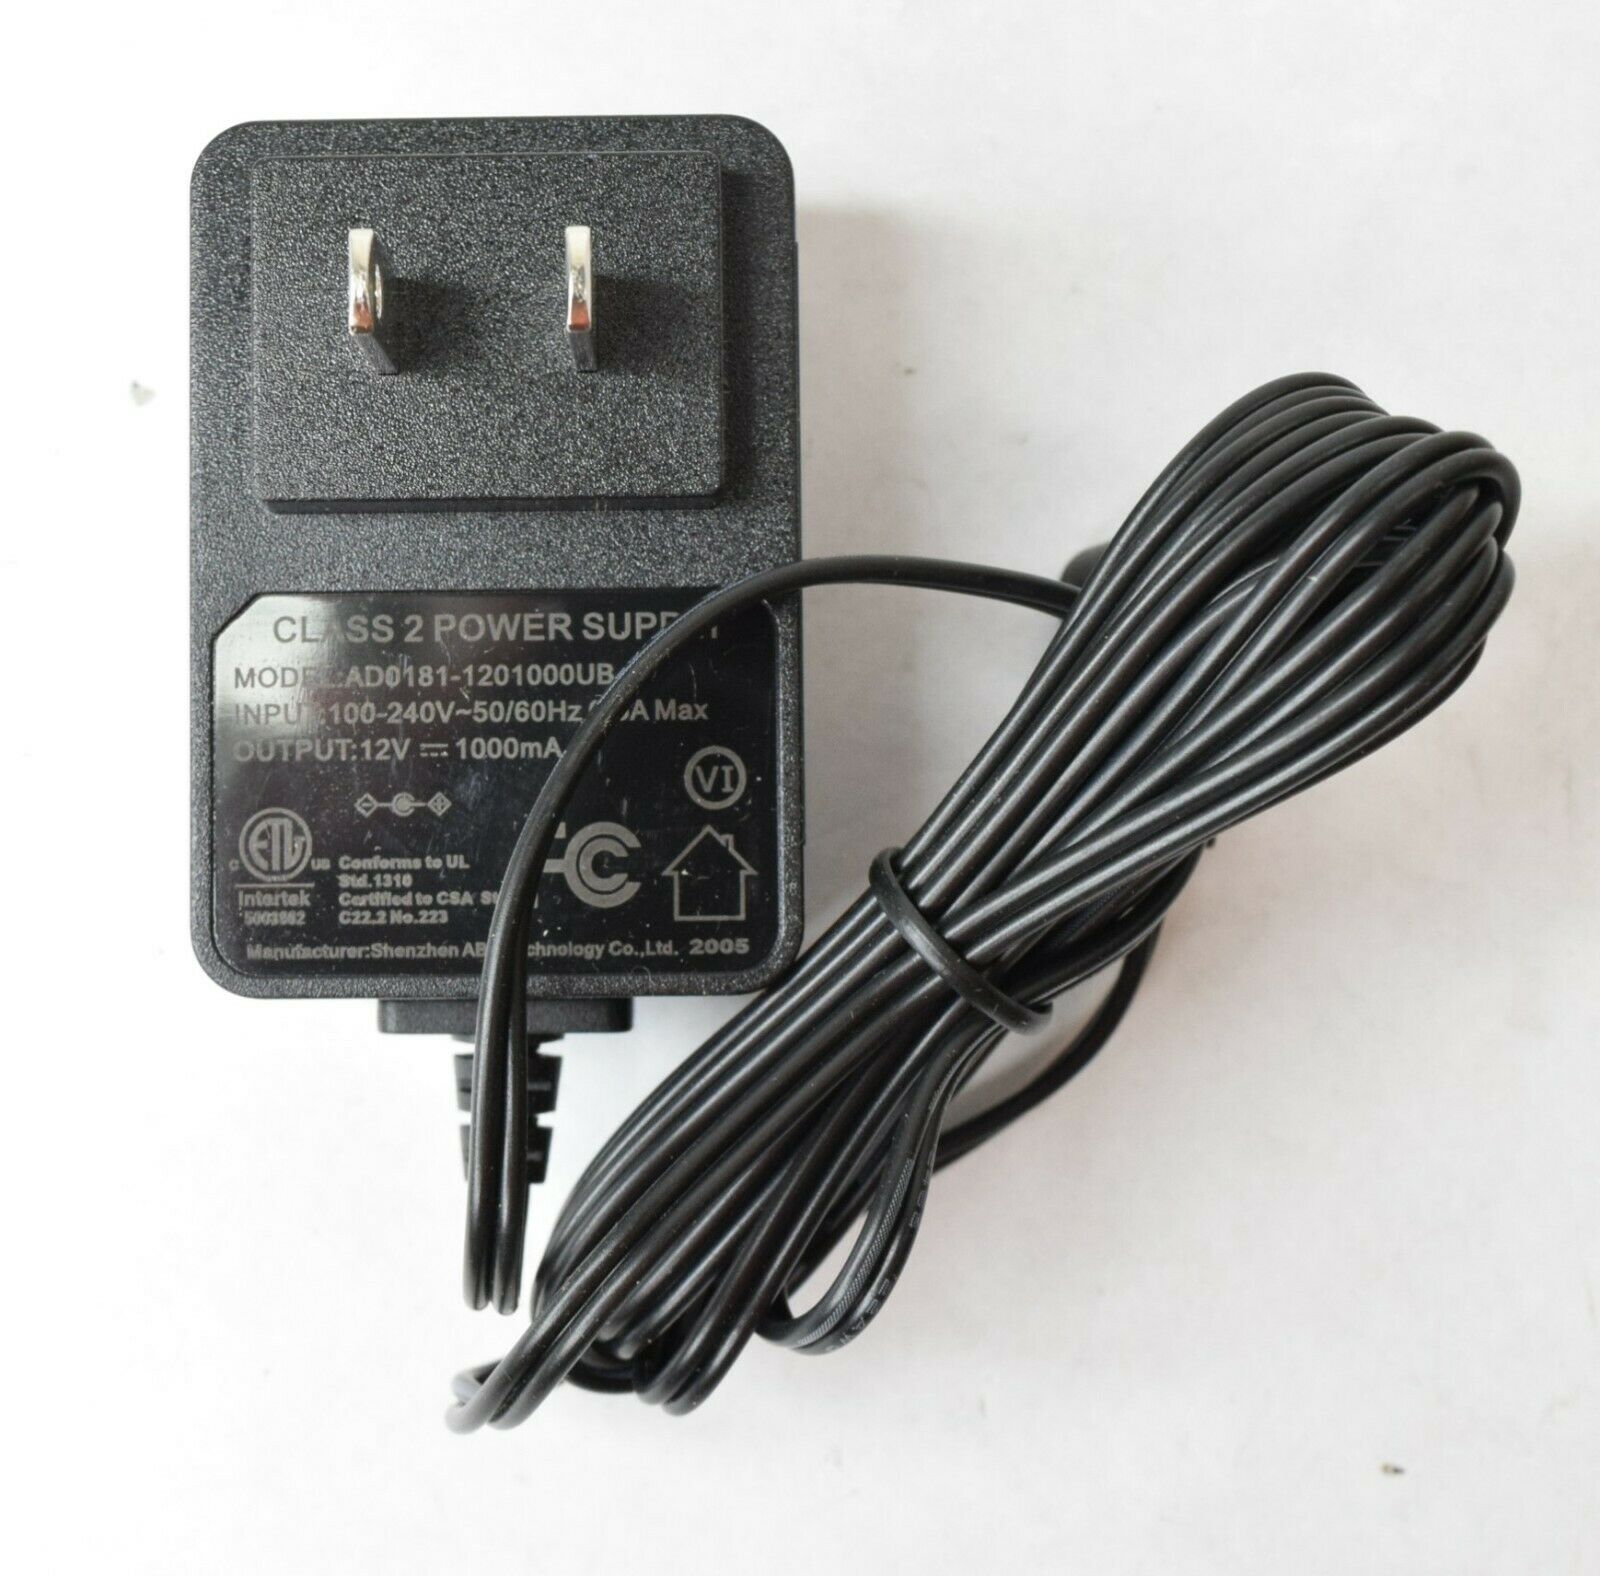 Shenzhen ABP Class 2 Power Supply Adapter Unit AD0181-1201000UB 12V 100mAh Type: Adapter MPN: AD0181-1201000UB Outpu